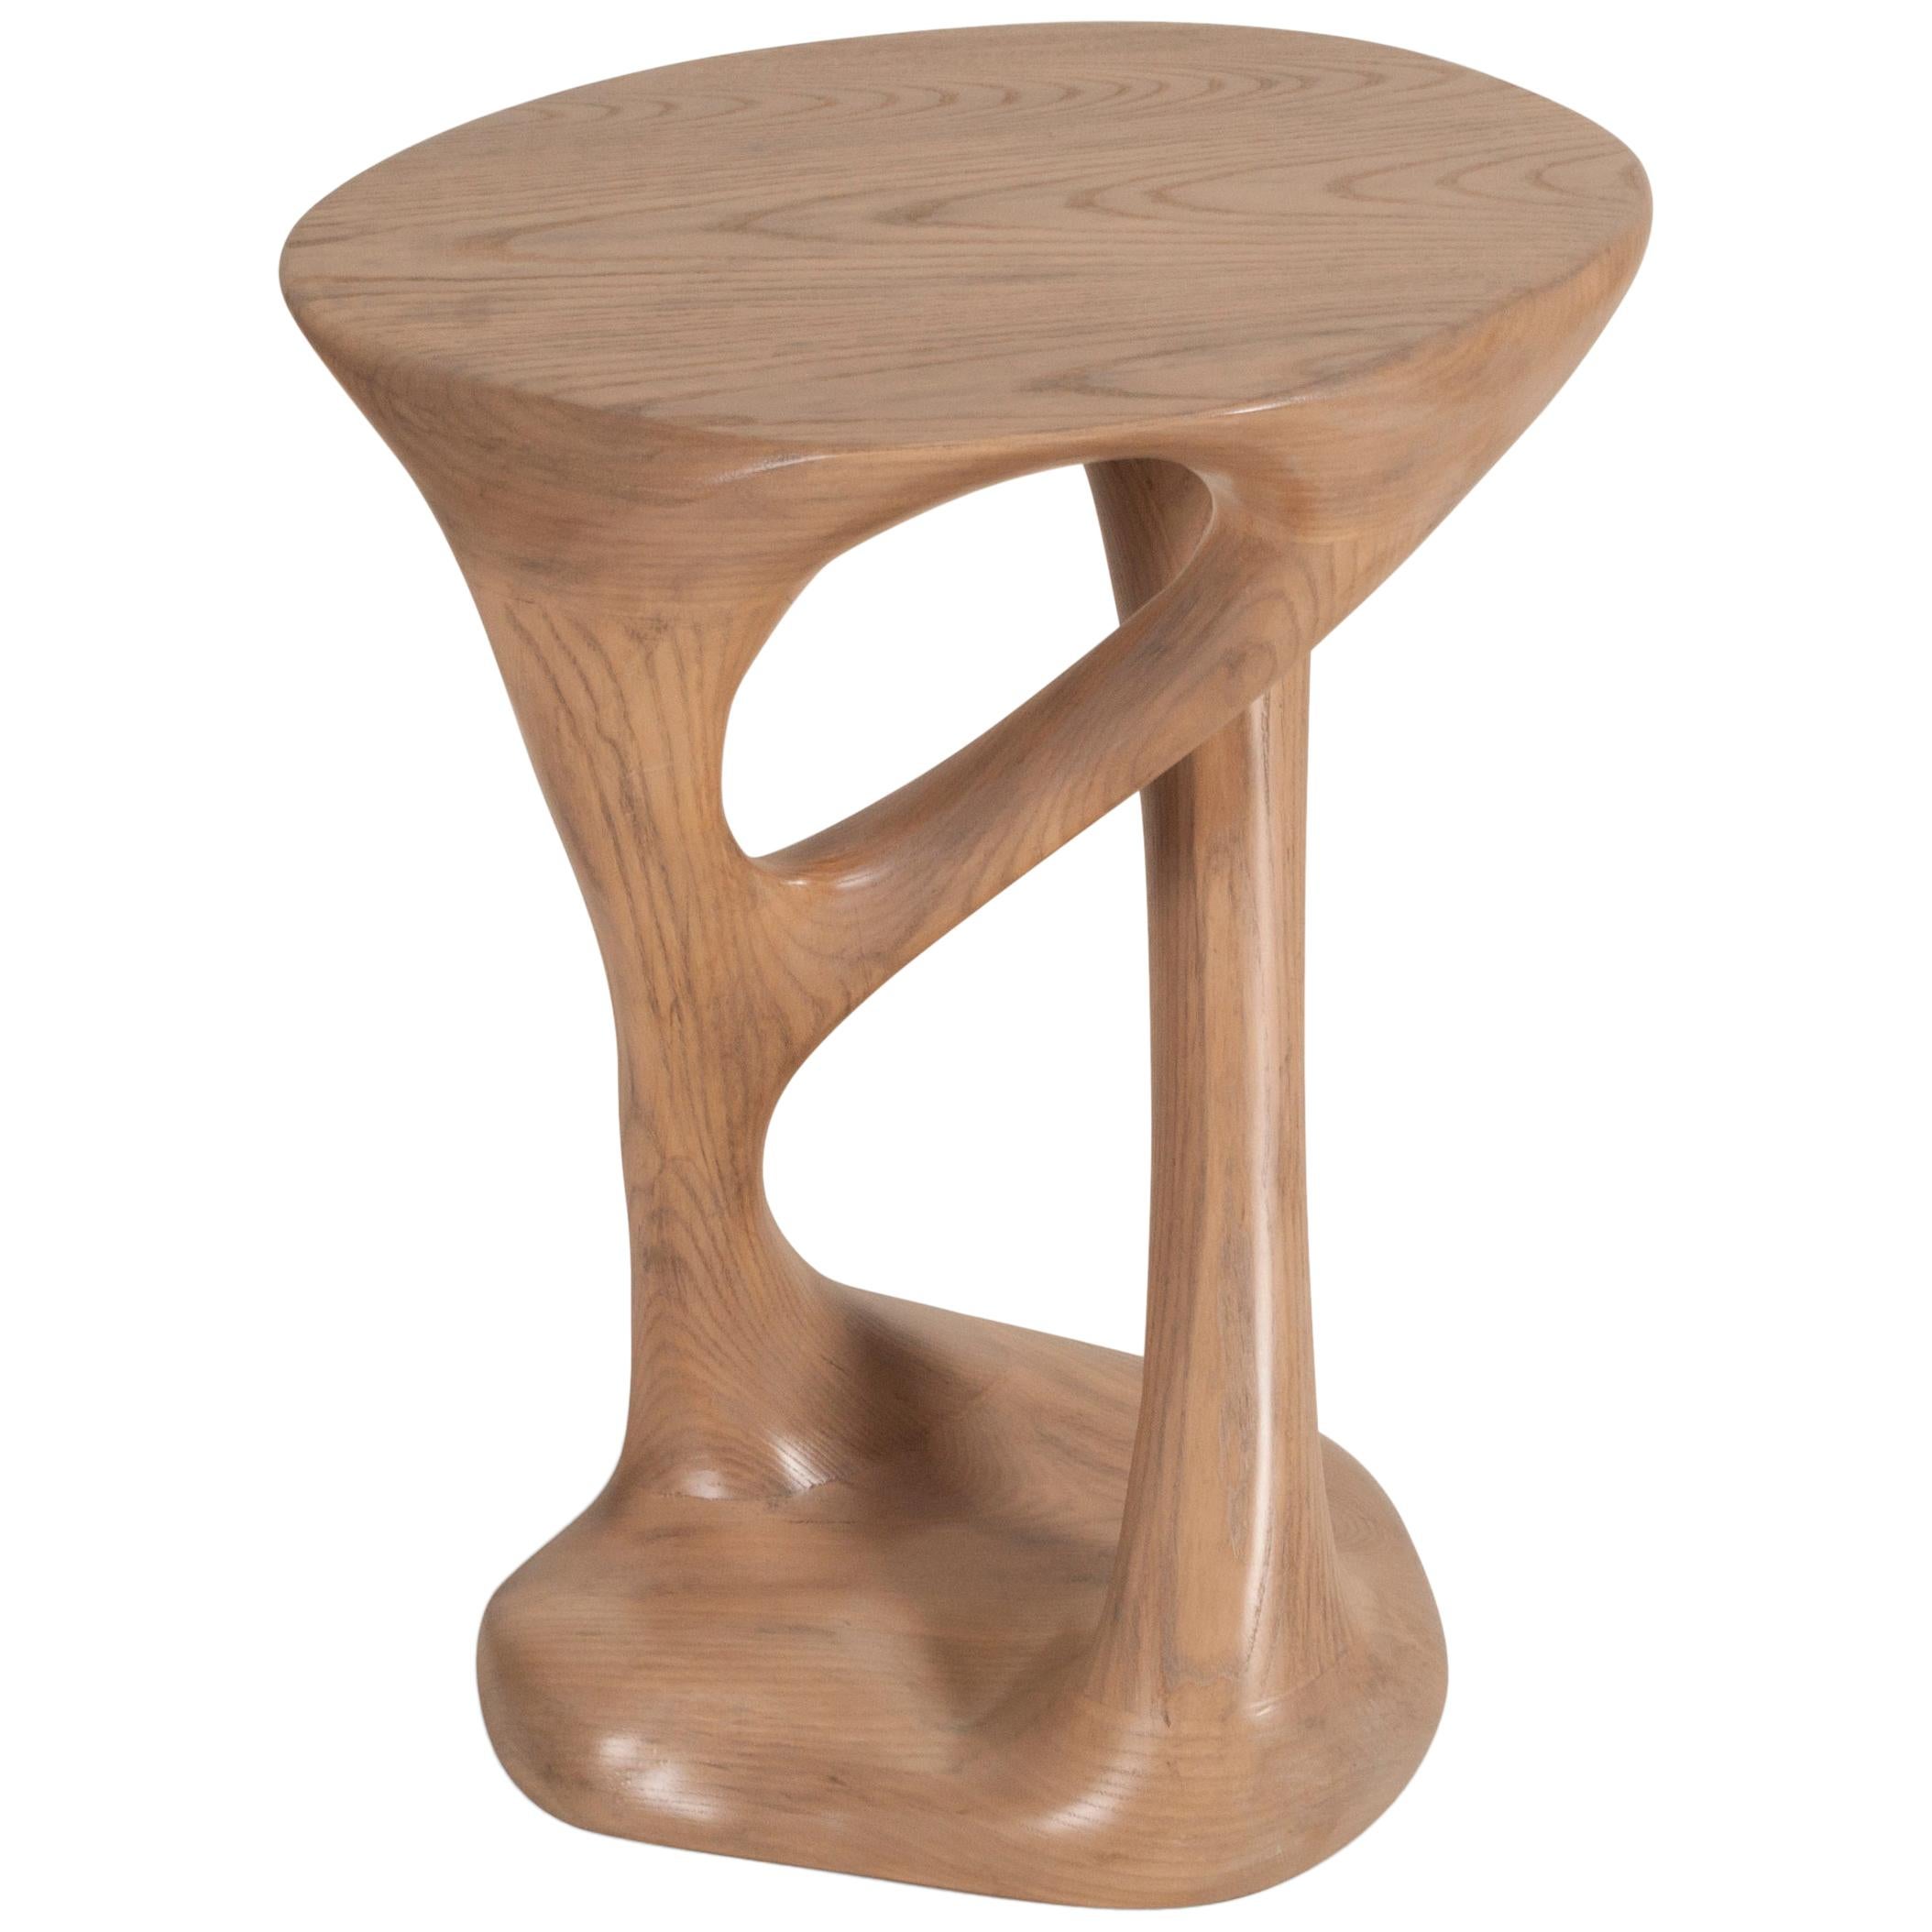 Sasha Side Table in Antique Oak stain on Ash wood 